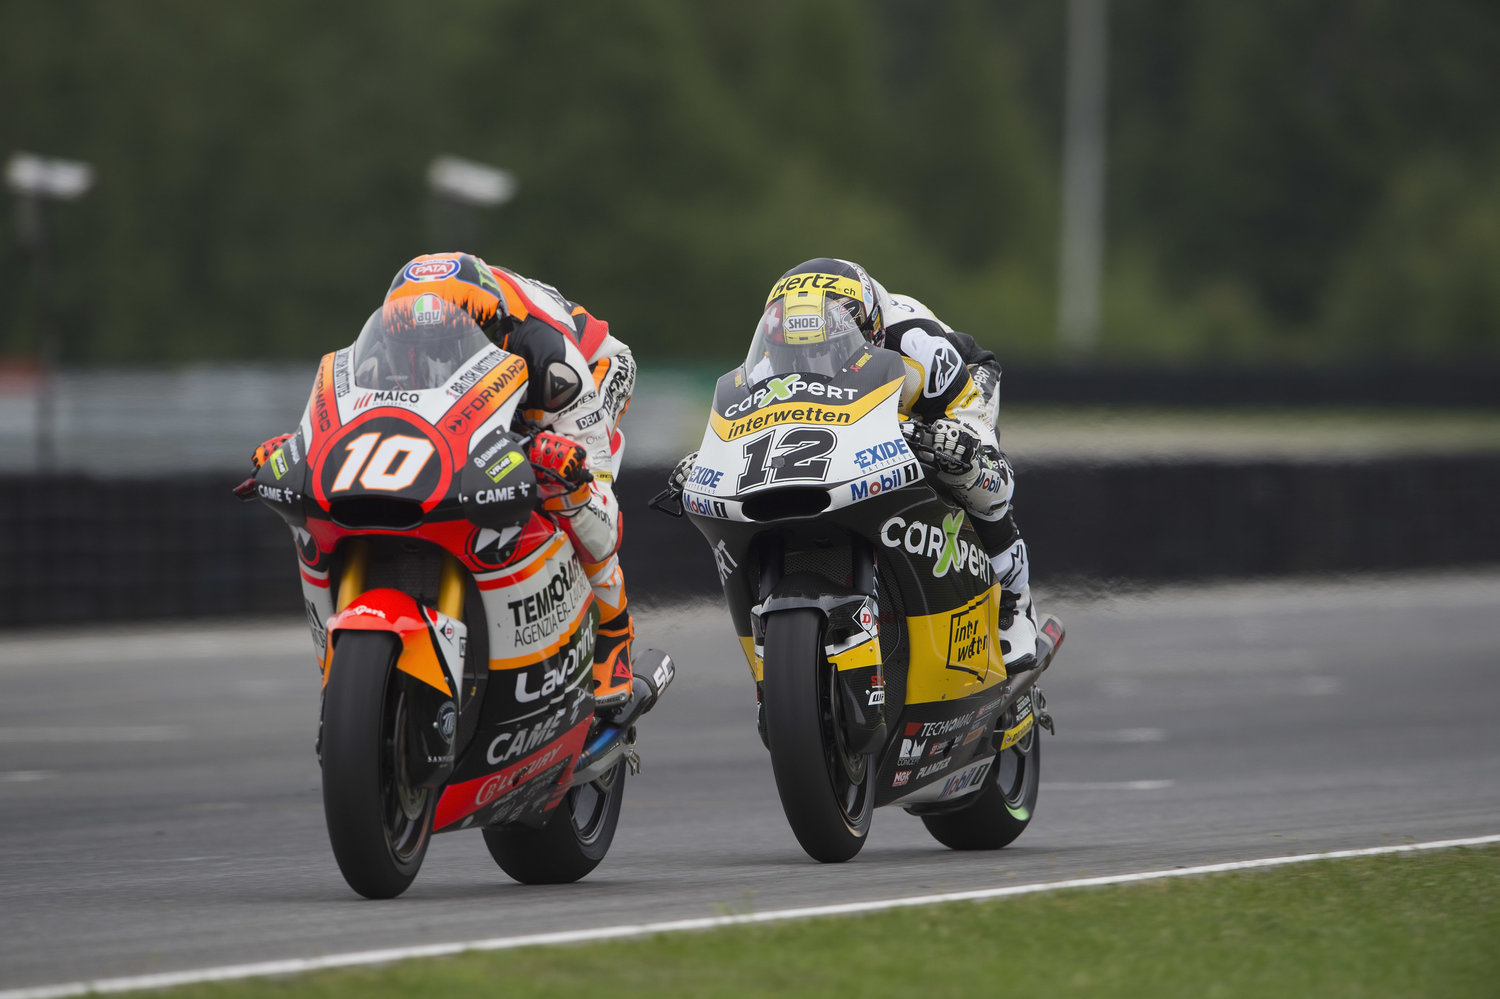 Marini storms to furious fourth in Brno to celebrate best career result